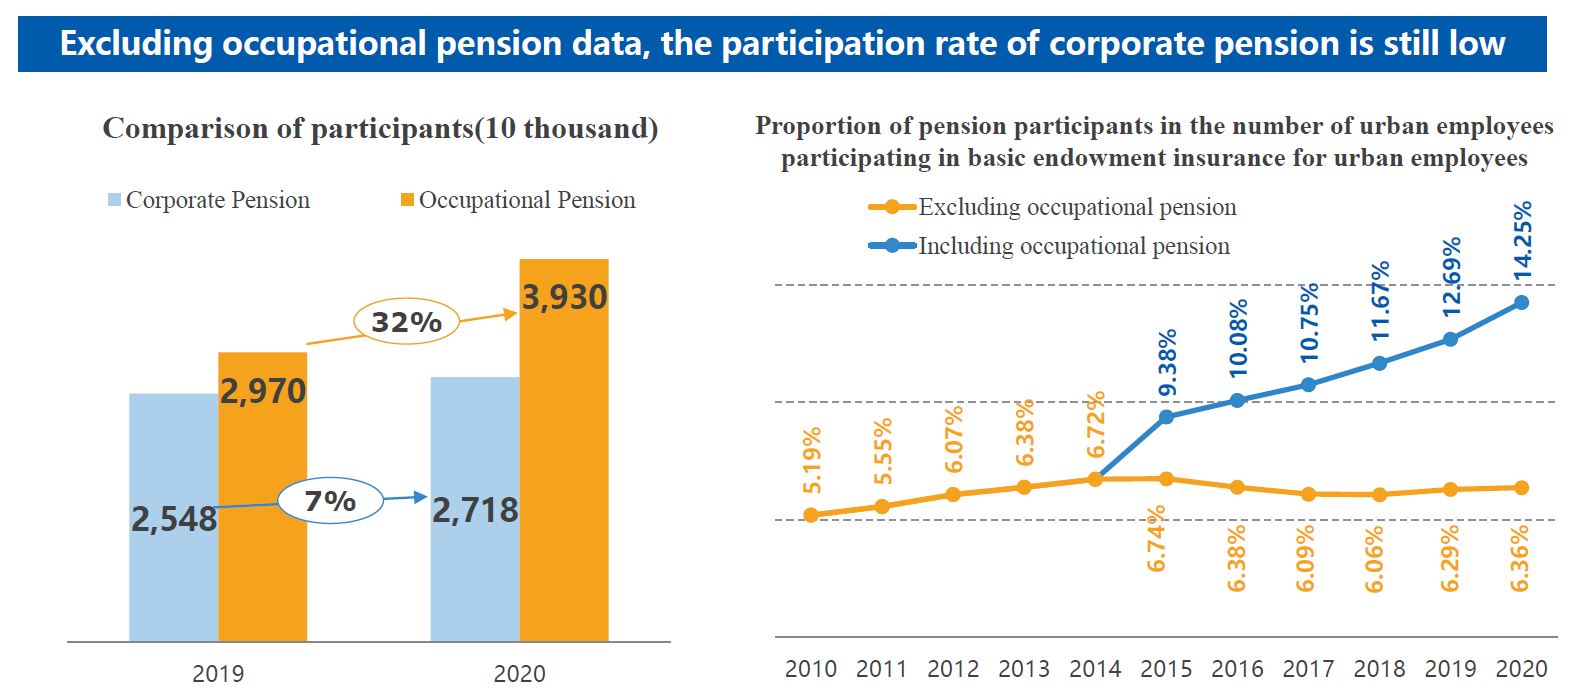 Participation rate of corporate pension